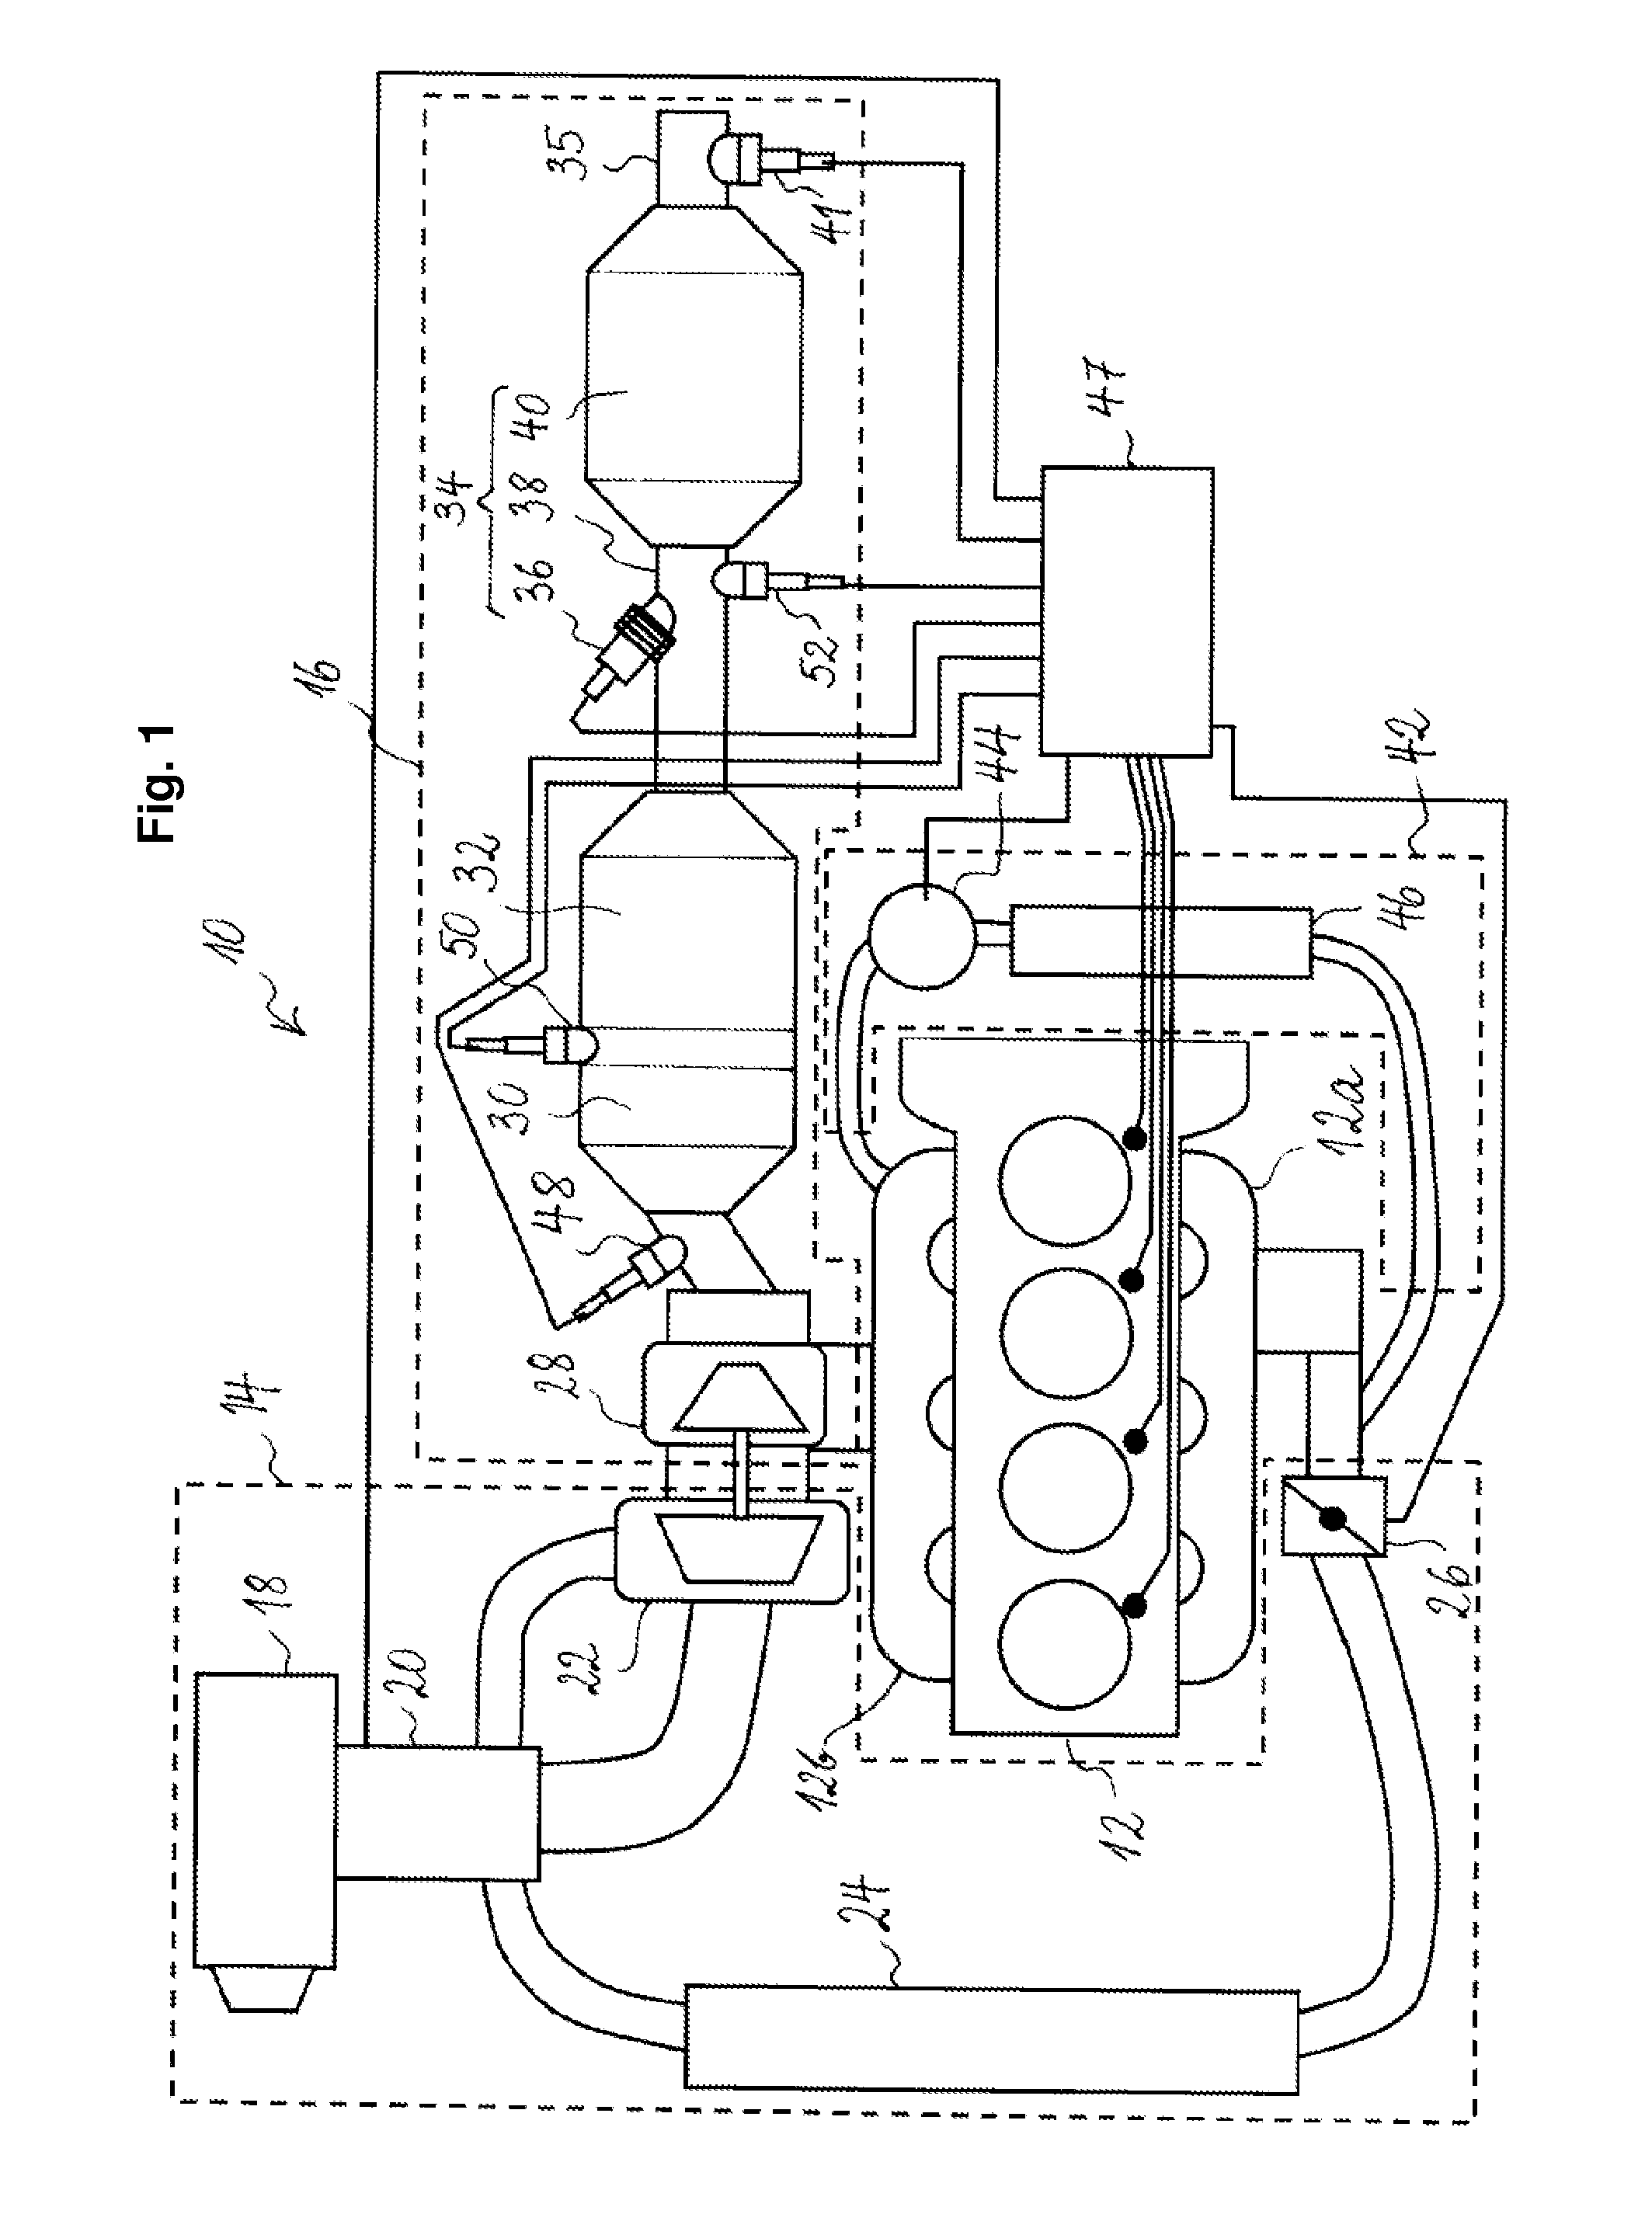 Compression-ignition engine with exhaust system